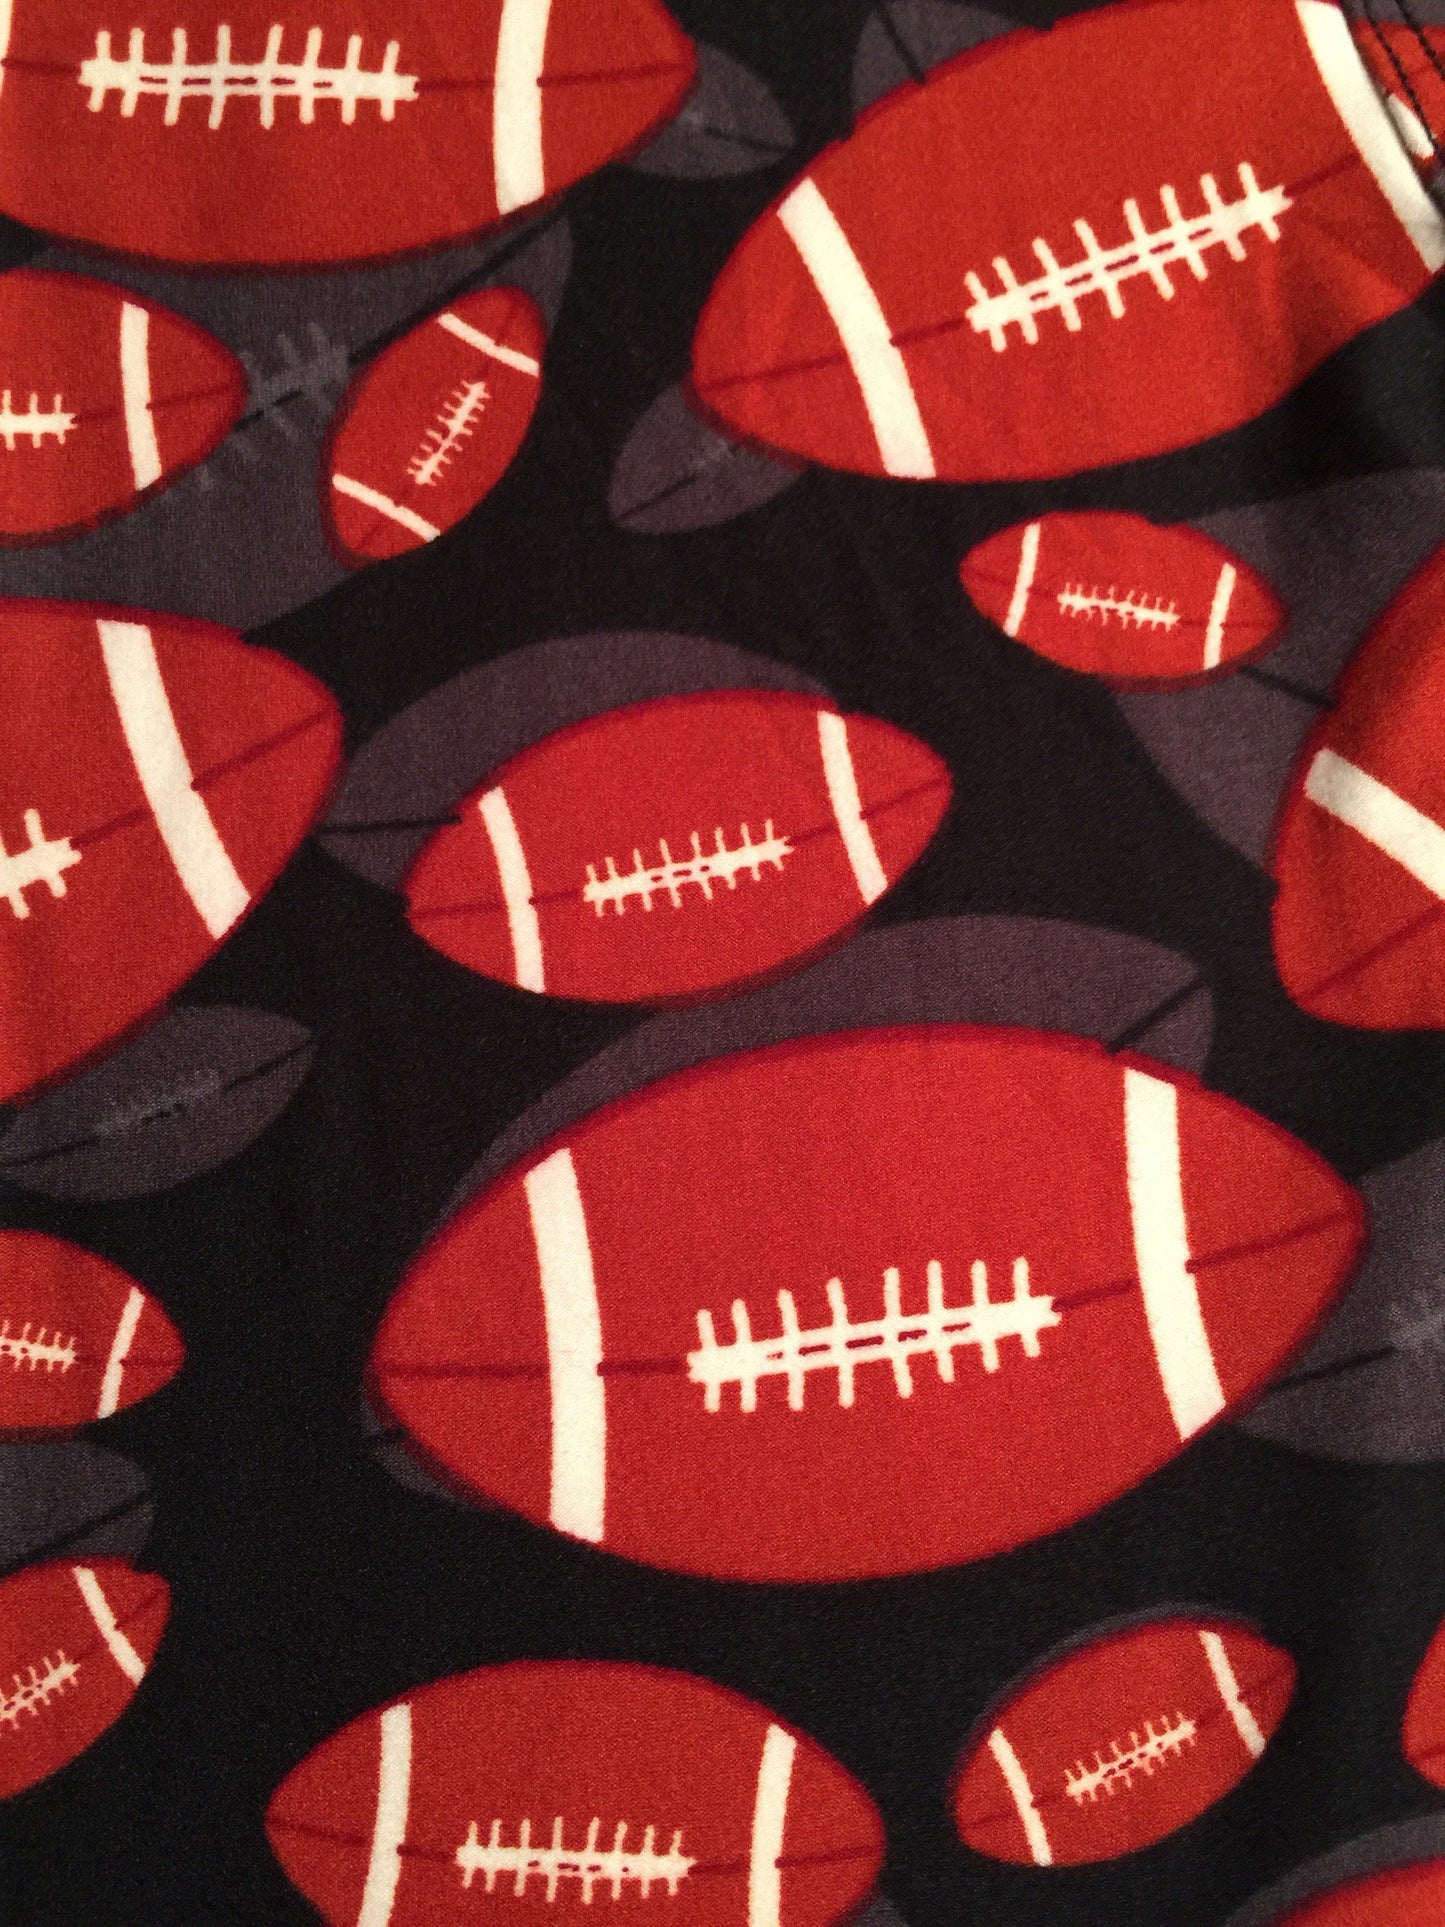 Unisex Football Printed Leggings Brown/Black: OS and Plus Leggings MomMe and More 